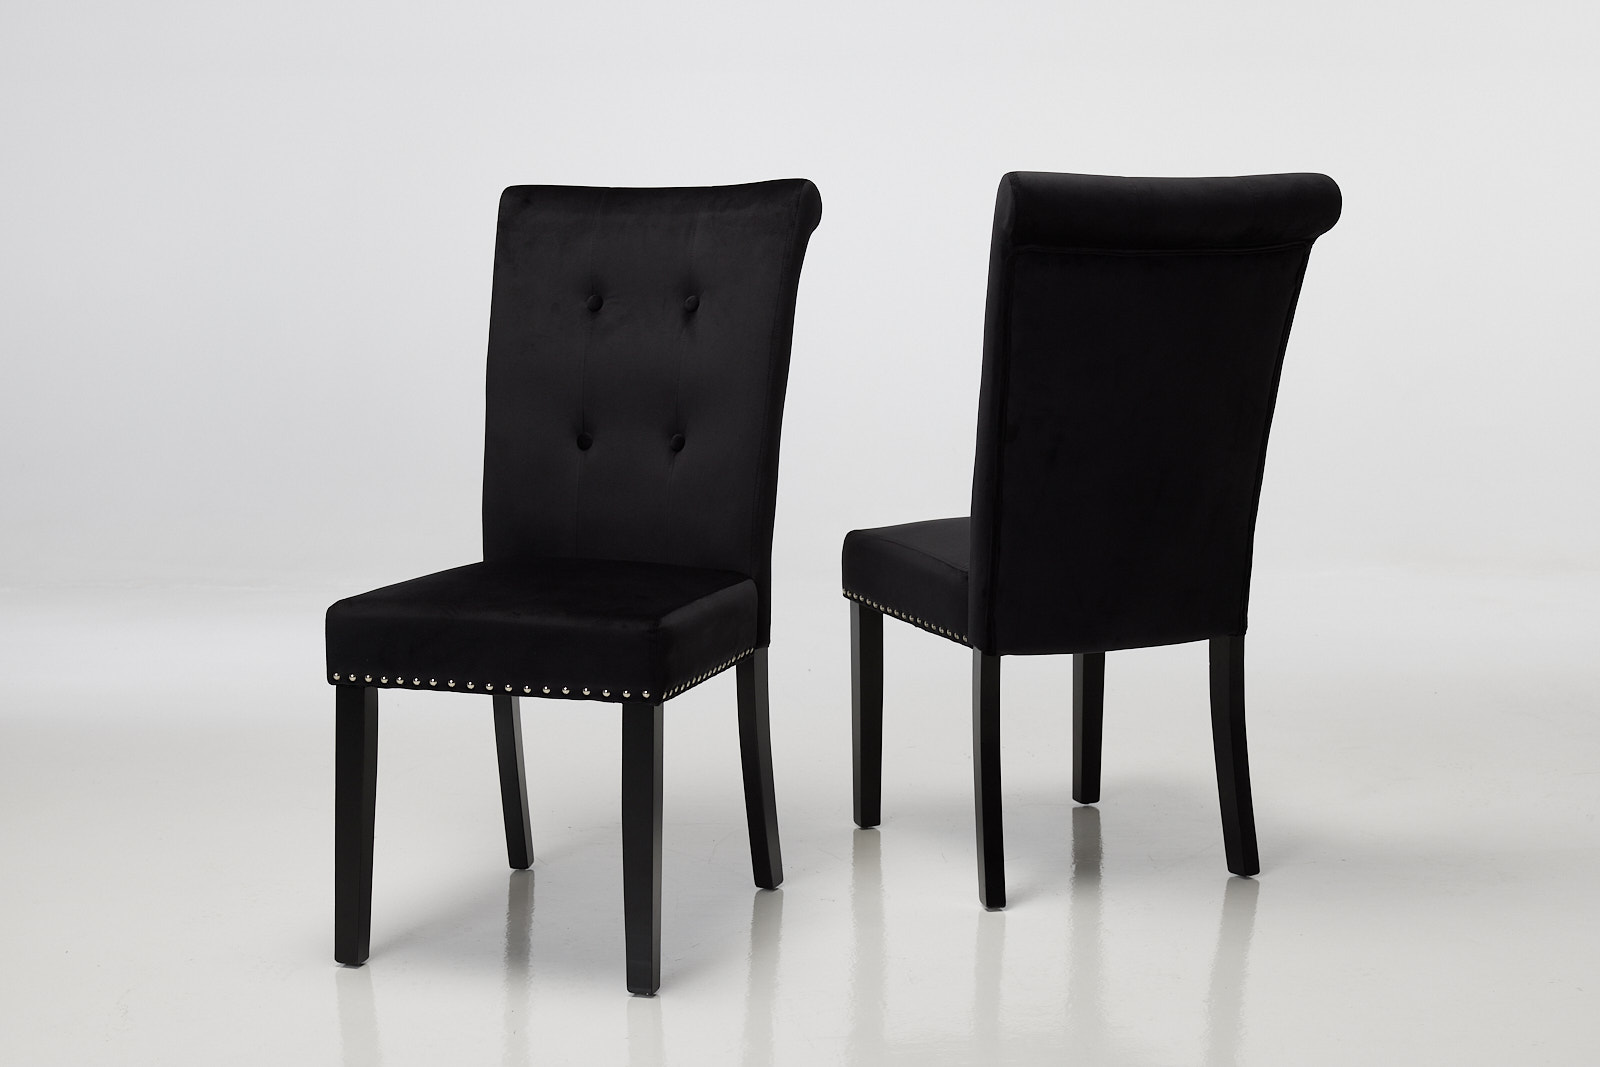 Cabrini Upholstered Dining Chairs with Black Legs - Black Velvet